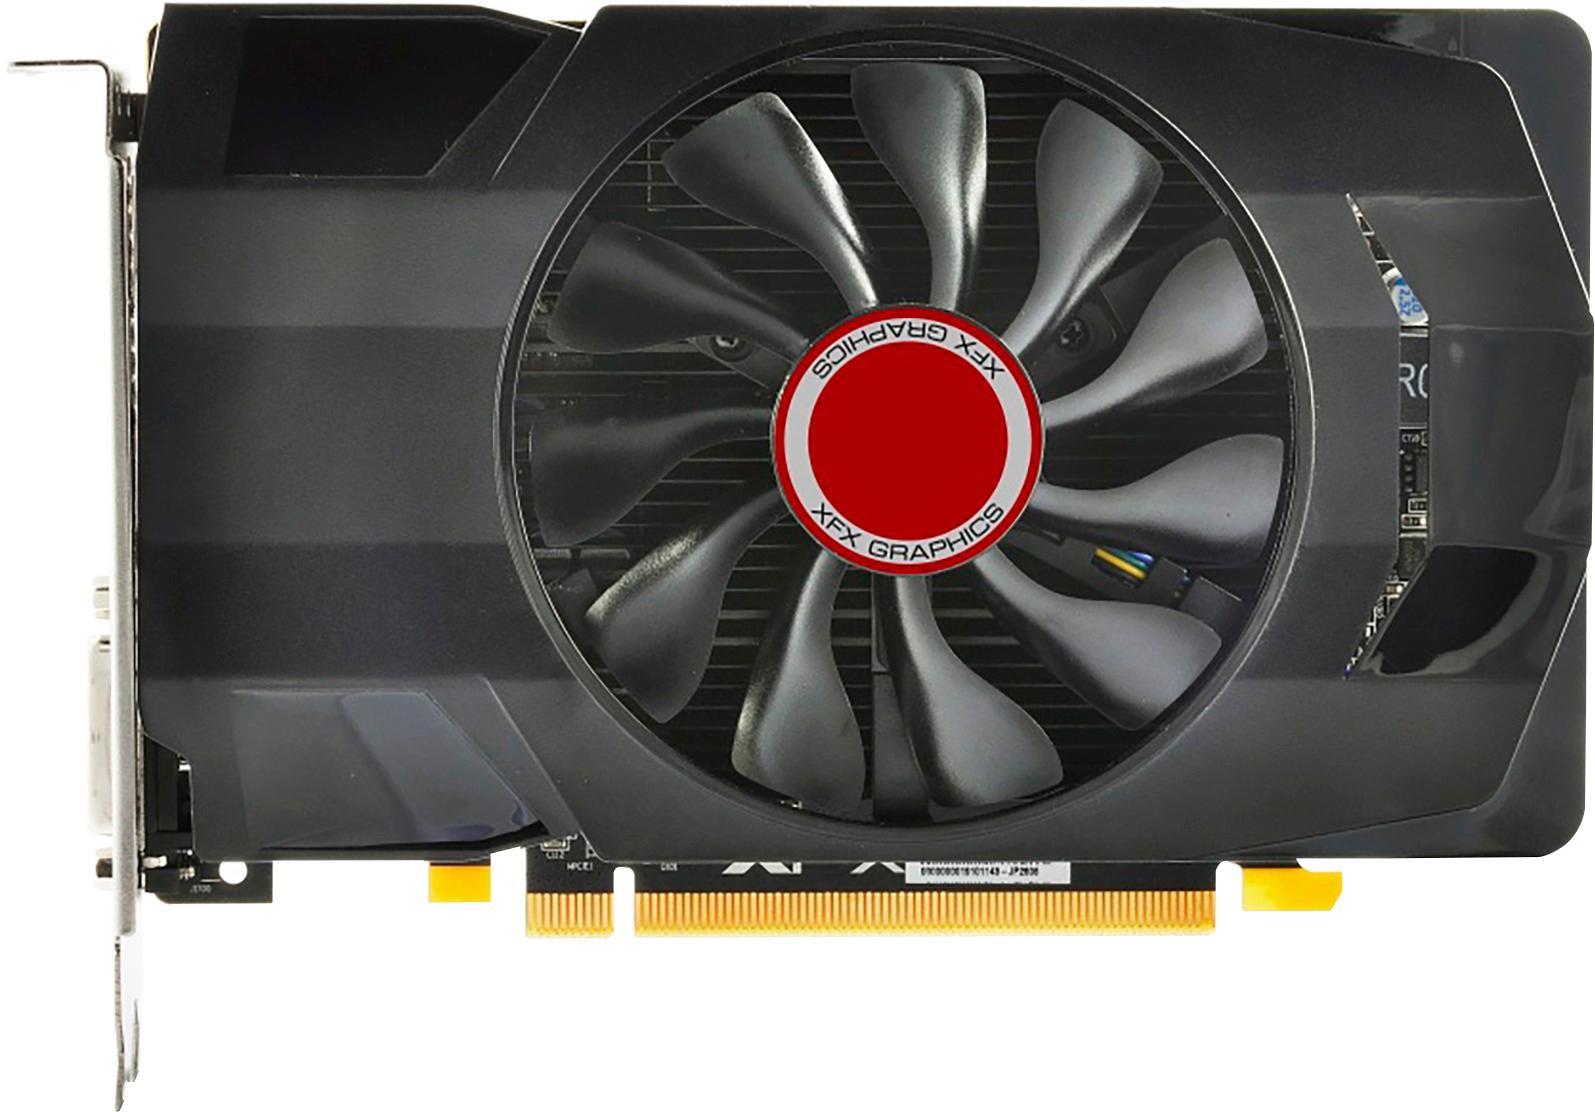 Take out insurance fair white XFX AMD Radeon RX 550 Core Edition 4GB GDDR5 PCI Express 3.0 Graphics Card  Black RX-550P4SFGR - Best Buy